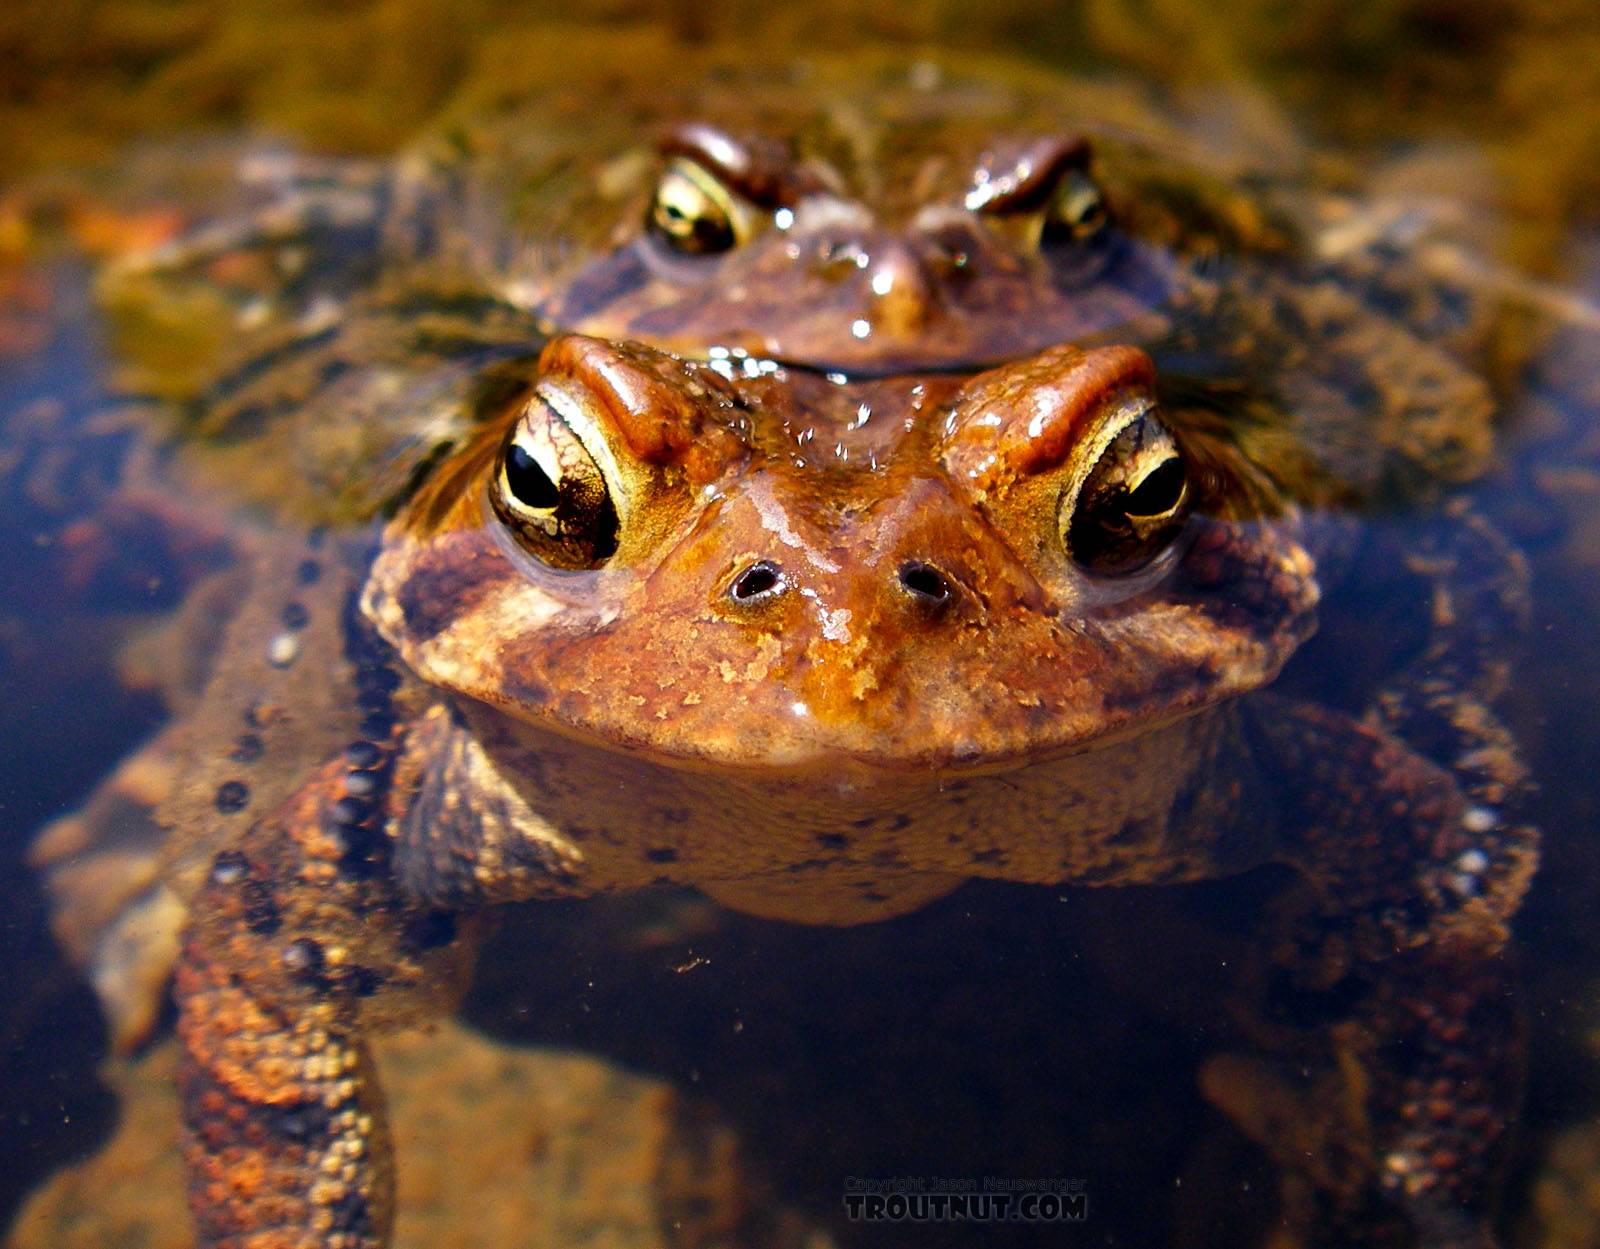 Mating toads, a common sight on Catskill rivers in early May. From the Neversink River Gorge (unnamed trib) in New York.